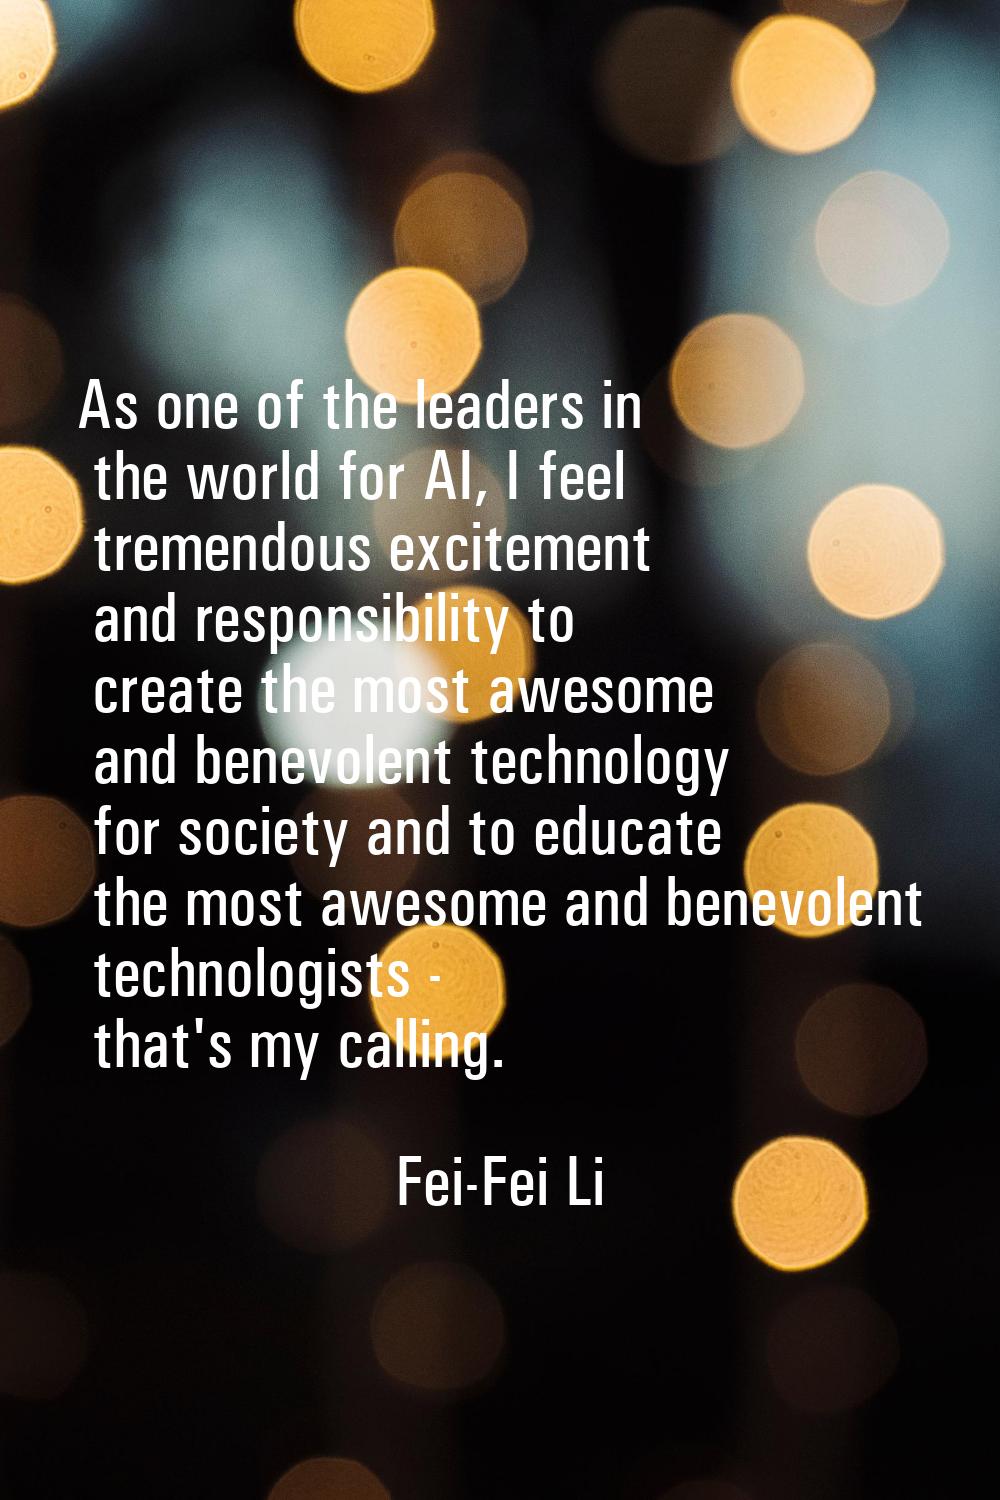 As one of the leaders in the world for AI, I feel tremendous excitement and responsibility to creat